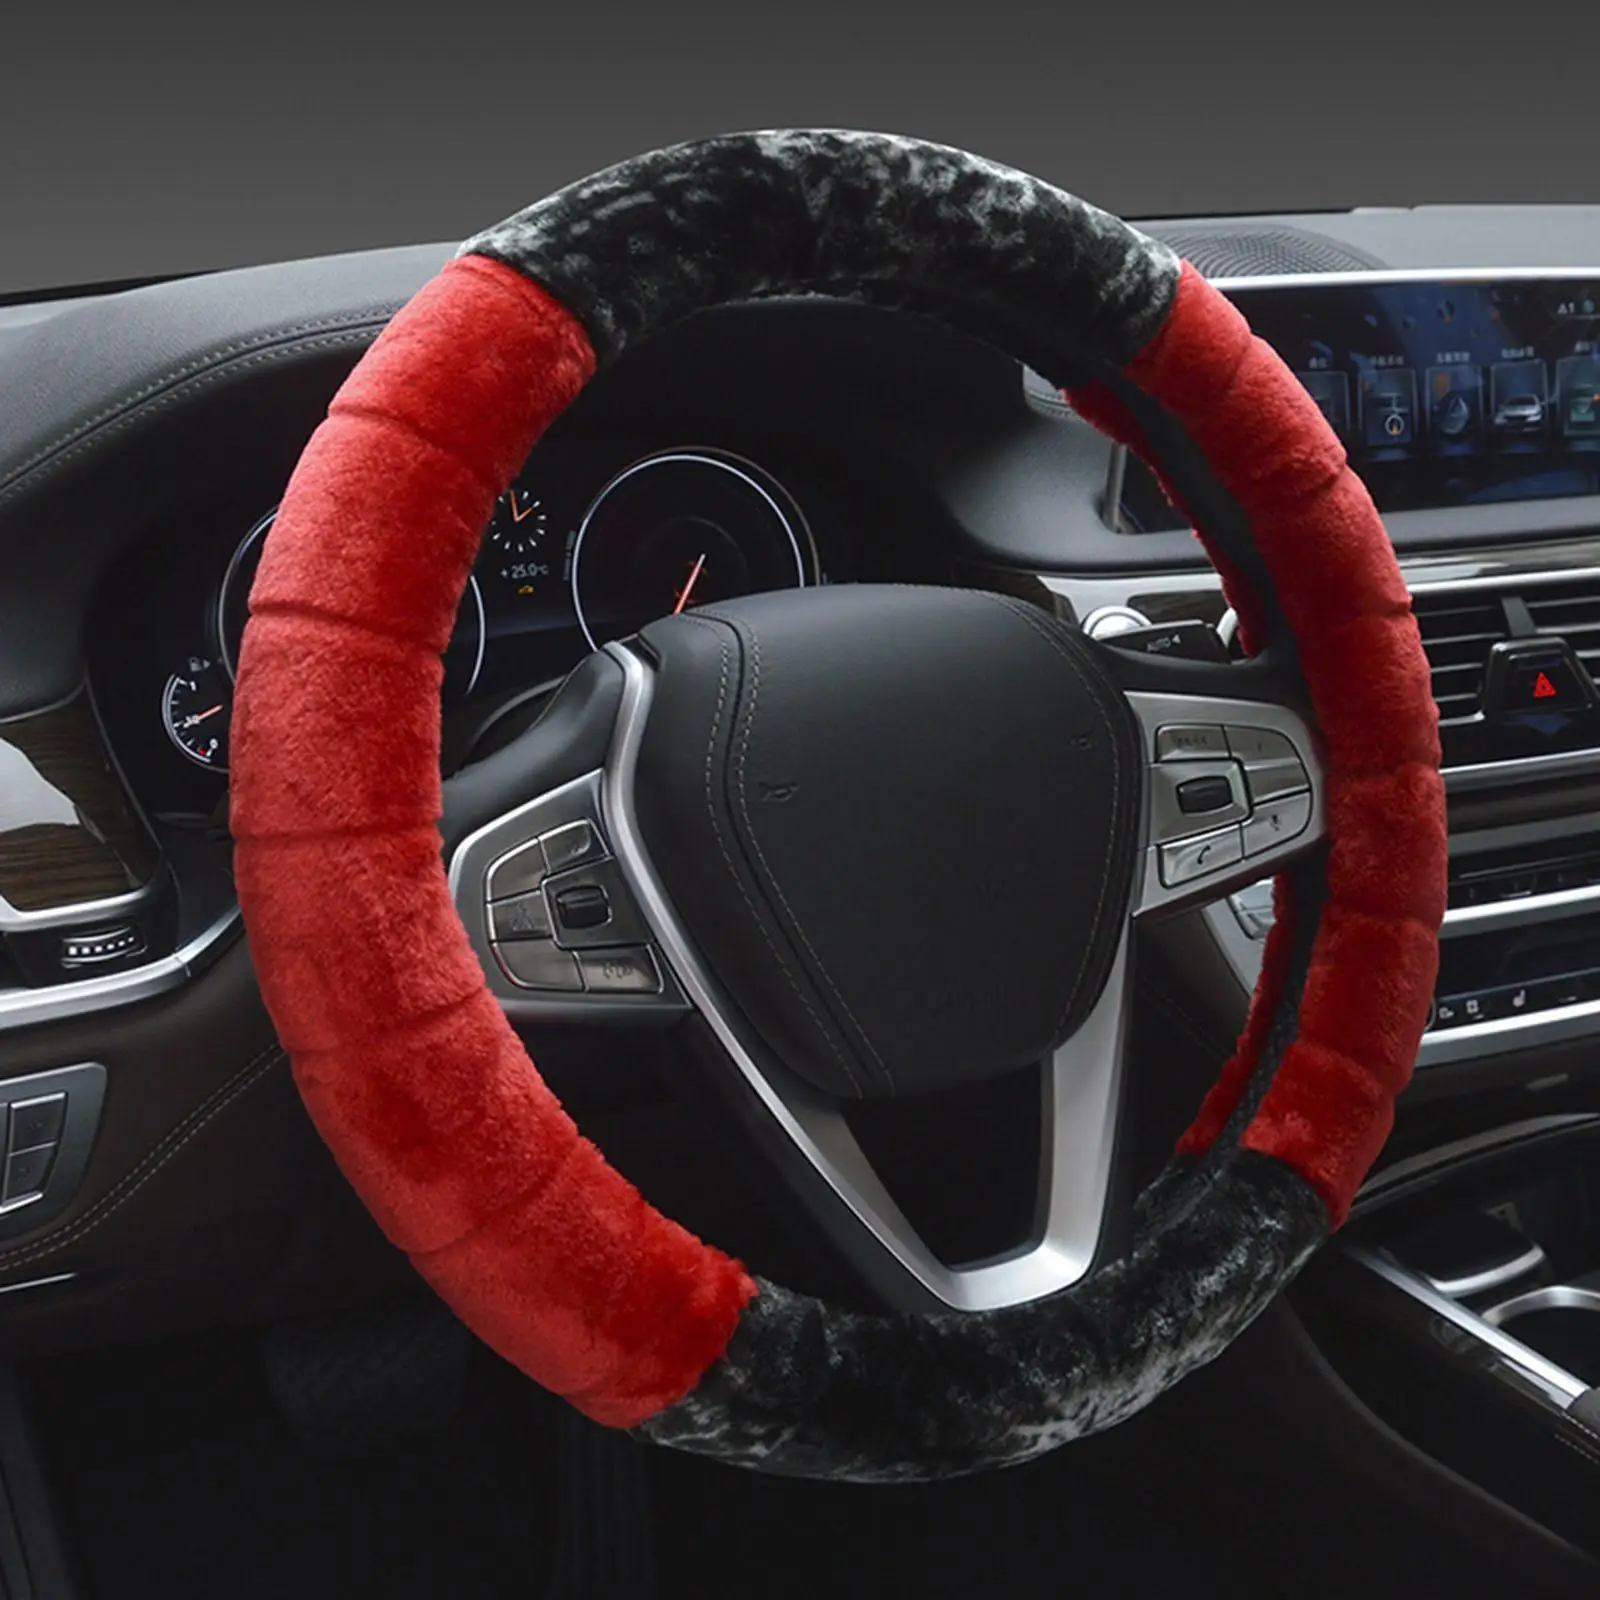 Car Steering Wheel Cover Universal 38cm Accessories Soft Plush Car Parts Classic Protector Anti-Slip for Winter Warm